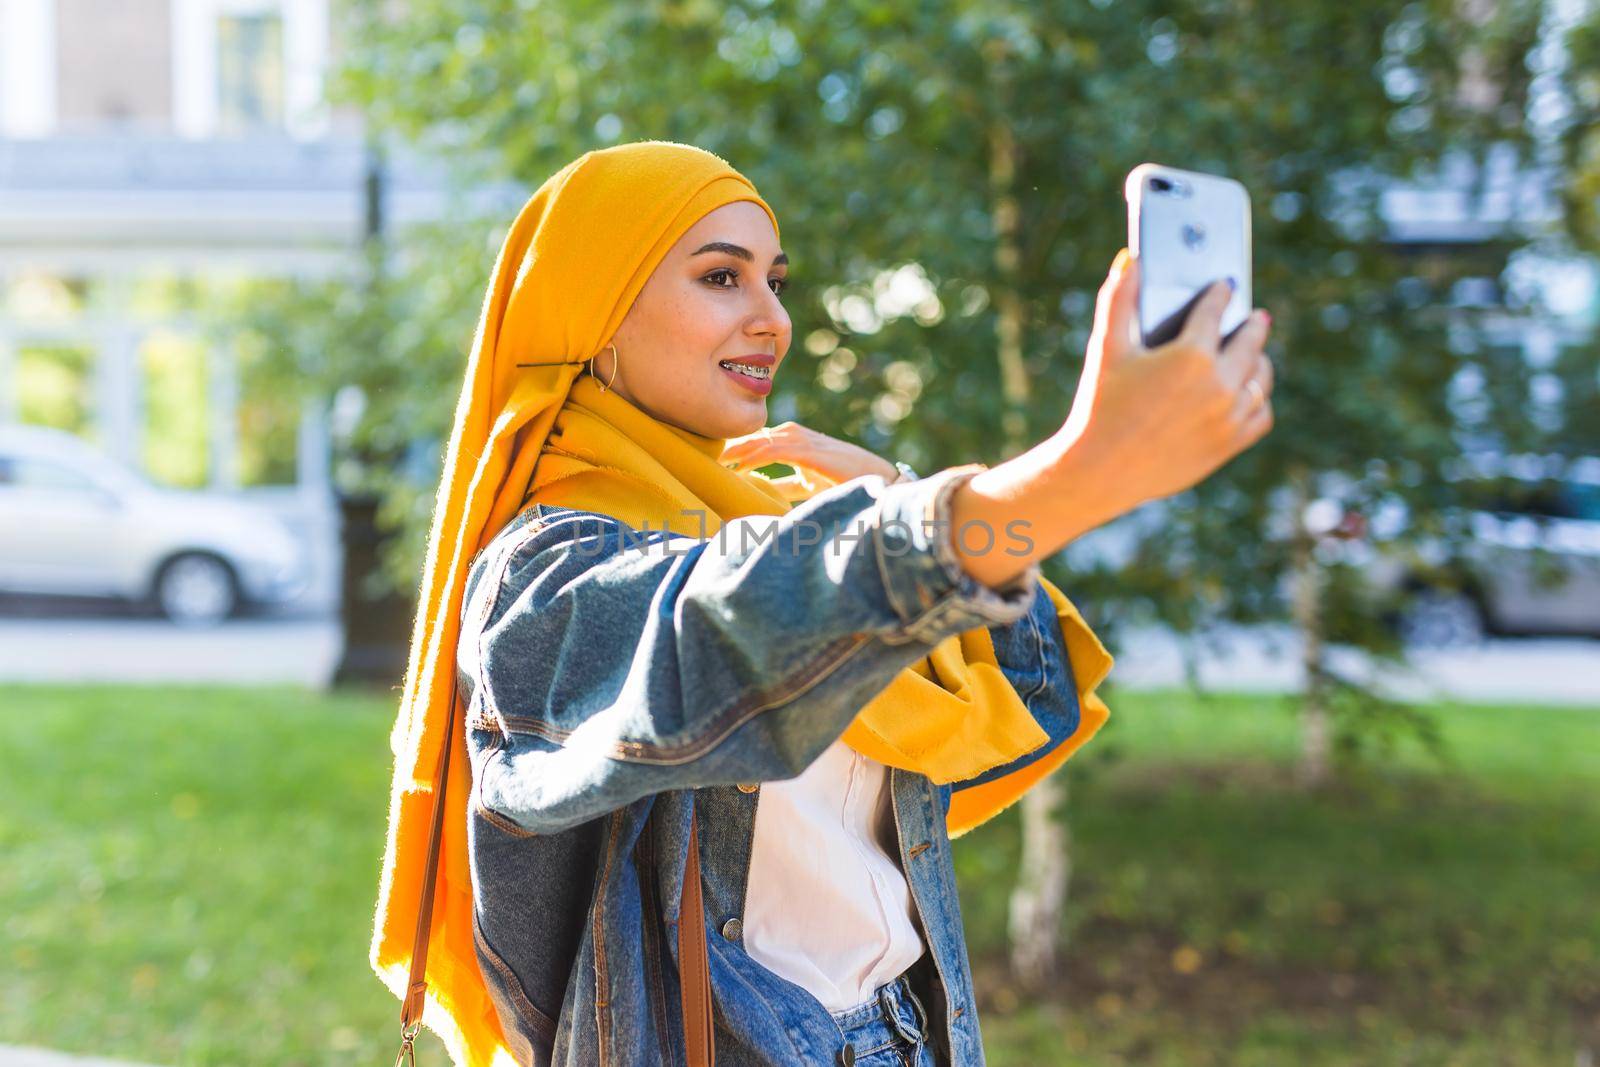 Muslim girl in hijab makes a selfie on the phone standing on the street of the city.